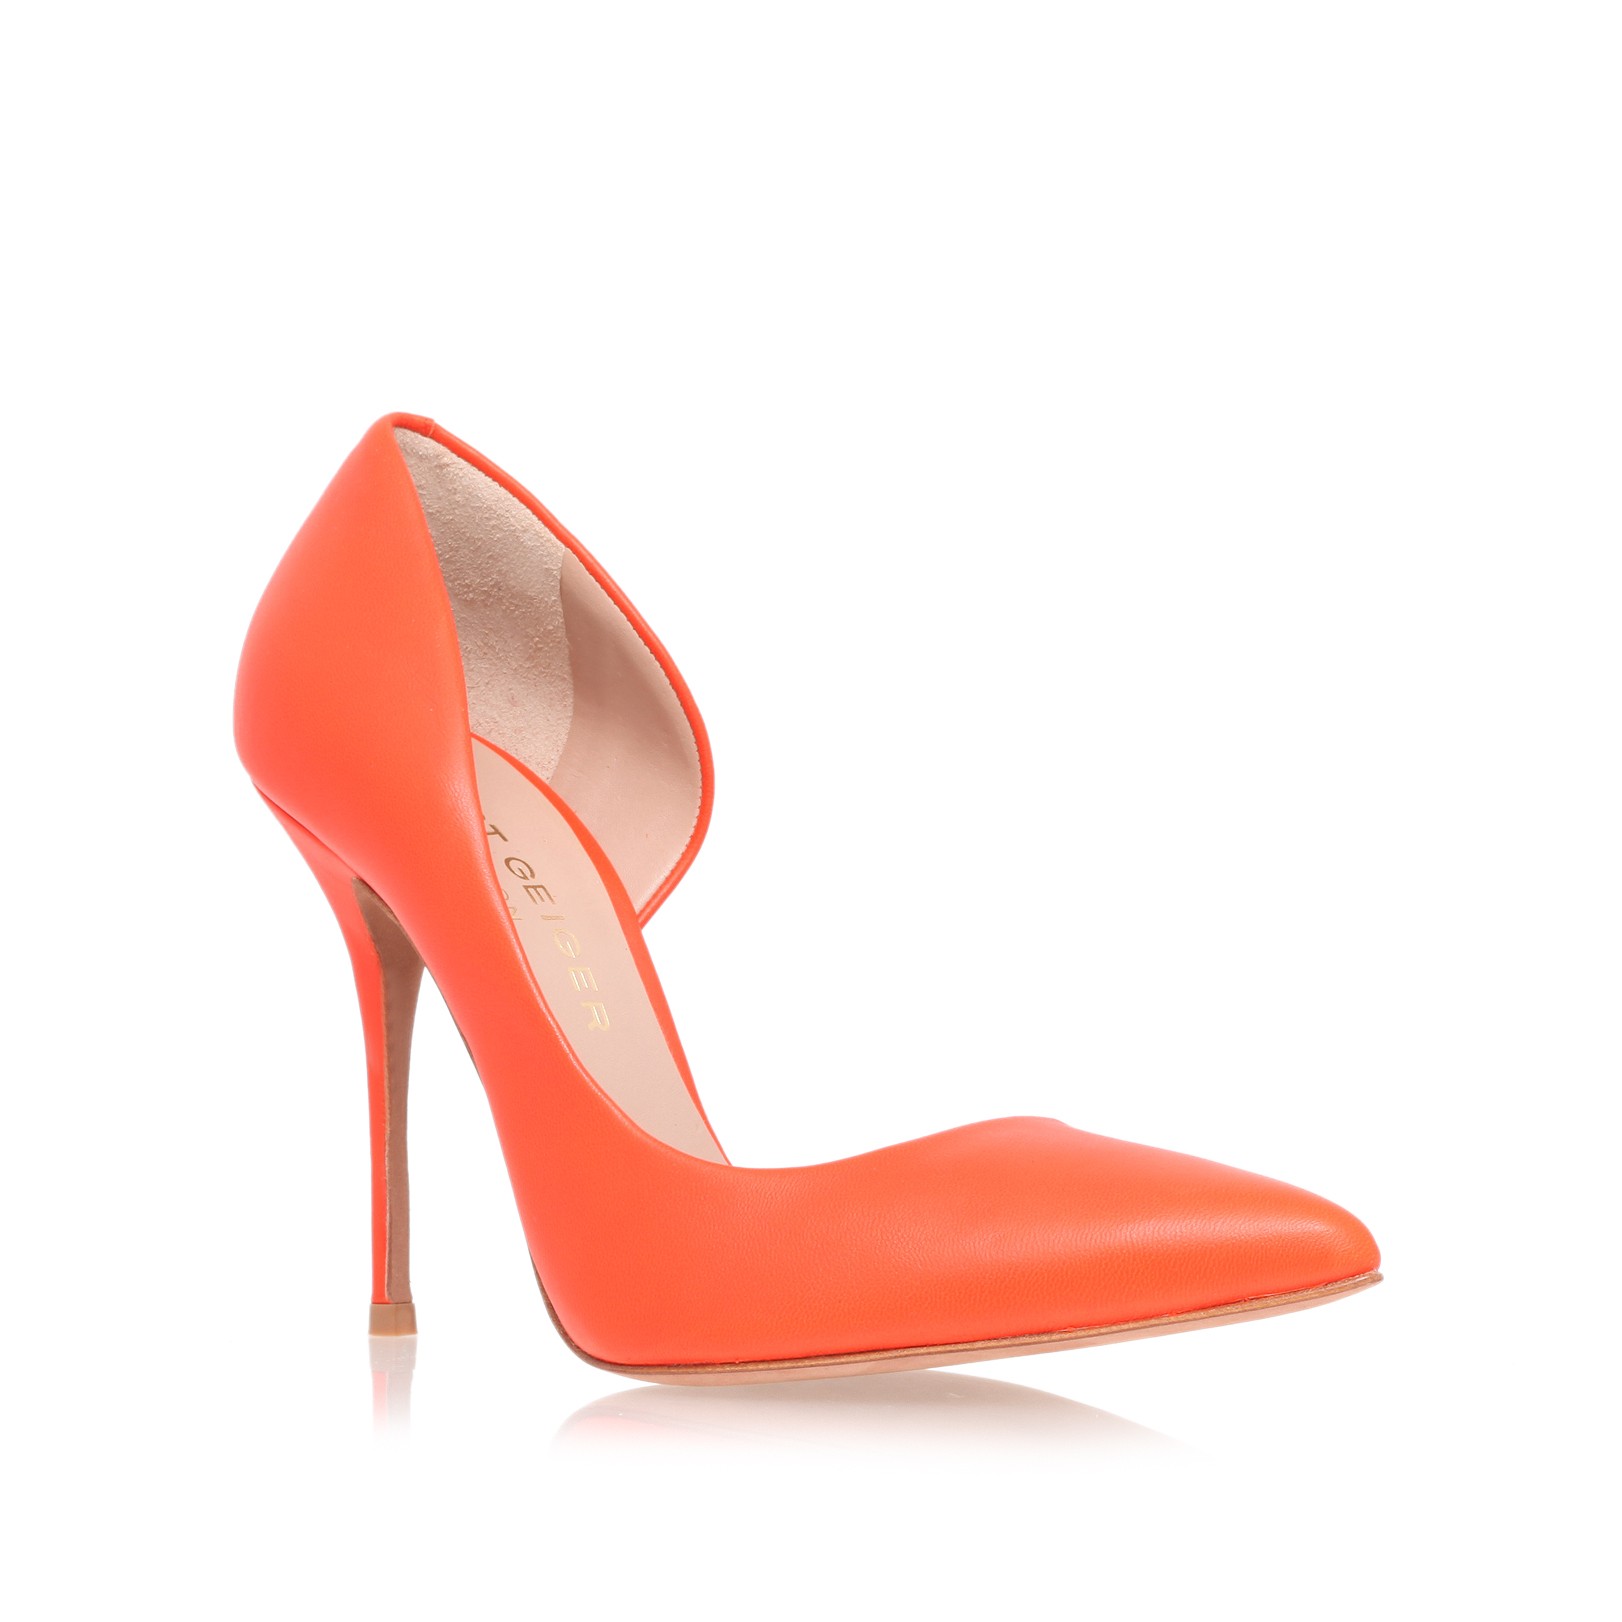 Summer Bright Shoes: Hot or Not? - FLAVOURMAG